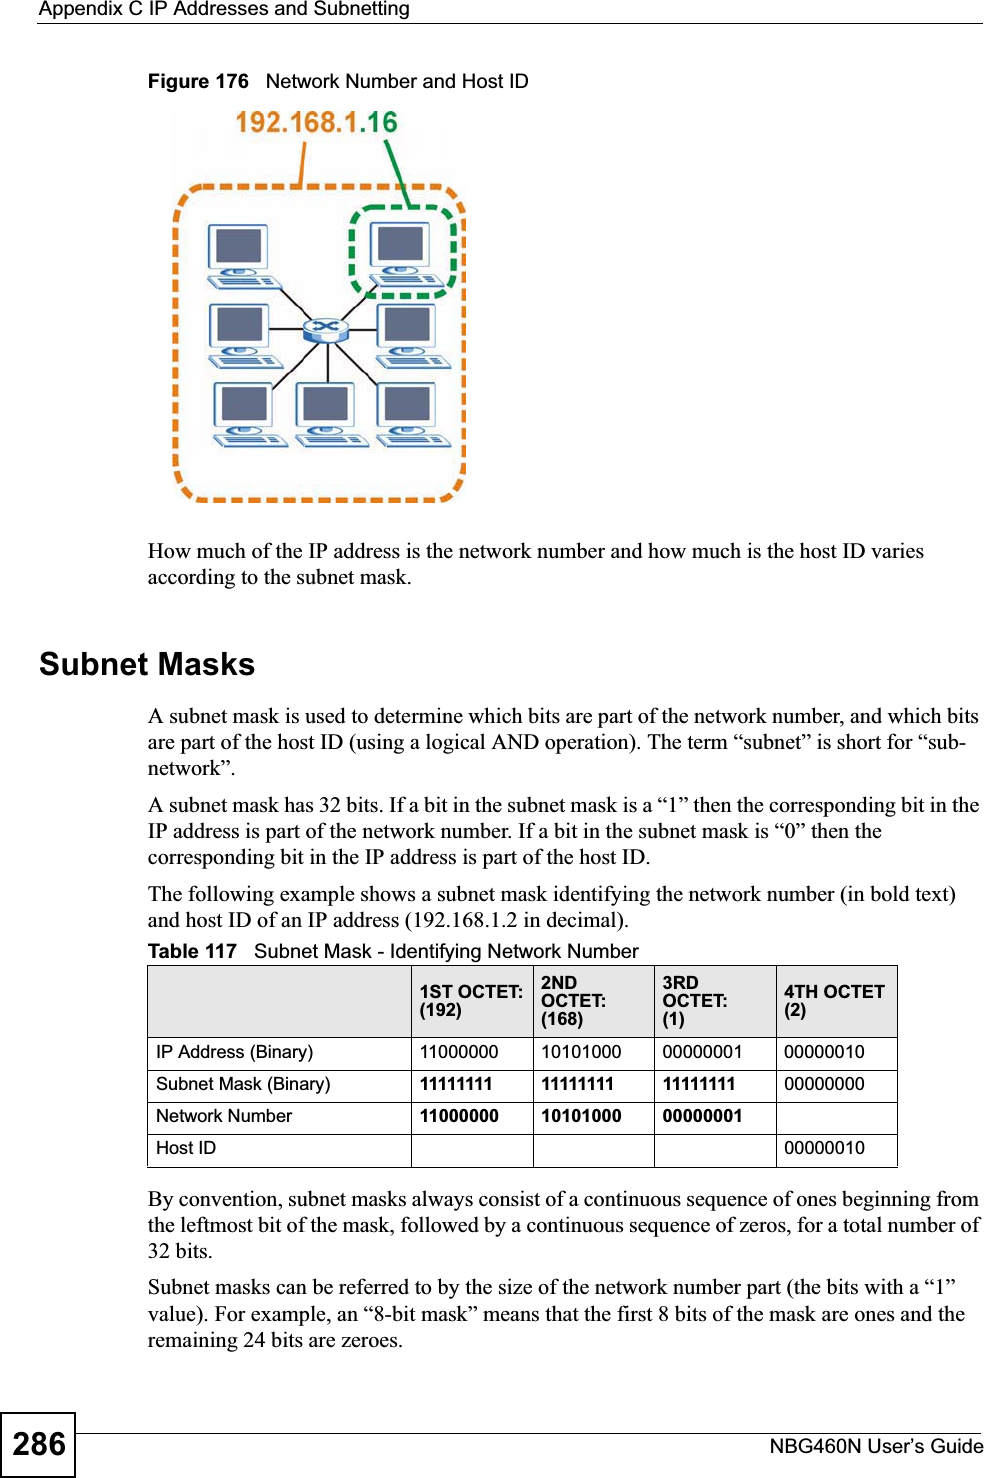 Appendix C IP Addresses and SubnettingNBG460N User’s Guide286Figure 176   Network Number and Host IDHow much of the IP address is the network number and how much is the host ID varies according to the subnet mask. Subnet MasksA subnet mask is used to determine which bits are part of the network number, and which bits are part of the host ID (using a logical AND operation). The term “subnet” is short for “sub-network”.A subnet mask has 32 bits. If a bit in the subnet mask is a “1” then the corresponding bit in the IP address is part of the network number. If a bit in the subnet mask is “0” then the corresponding bit in the IP address is part of the host ID. The following example shows a subnet mask identifying the network number (in bold text) and host ID of an IP address (192.168.1.2 in decimal).By convention, subnet masks always consist of a continuous sequence of ones beginning from the leftmost bit of the mask, followed by a continuous sequence of zeros, for a total number of 32 bits.Subnet masks can be referred to by the size of the network number part (the bits with a “1” value). For example, an “8-bit mask” means that the first 8 bits of the mask are ones and the remaining 24 bits are zeroes.Table 117   Subnet Mask - Identifying Network Number1ST OCTET:(192)2ND OCTET:(168)3RD OCTET:(1)4TH OCTET(2)IP Address (Binary) 11000000 10101000 00000001 00000010Subnet Mask (Binary) 11111111 11111111 11111111 00000000Network Number 11000000 10101000 00000001Host ID 00000010